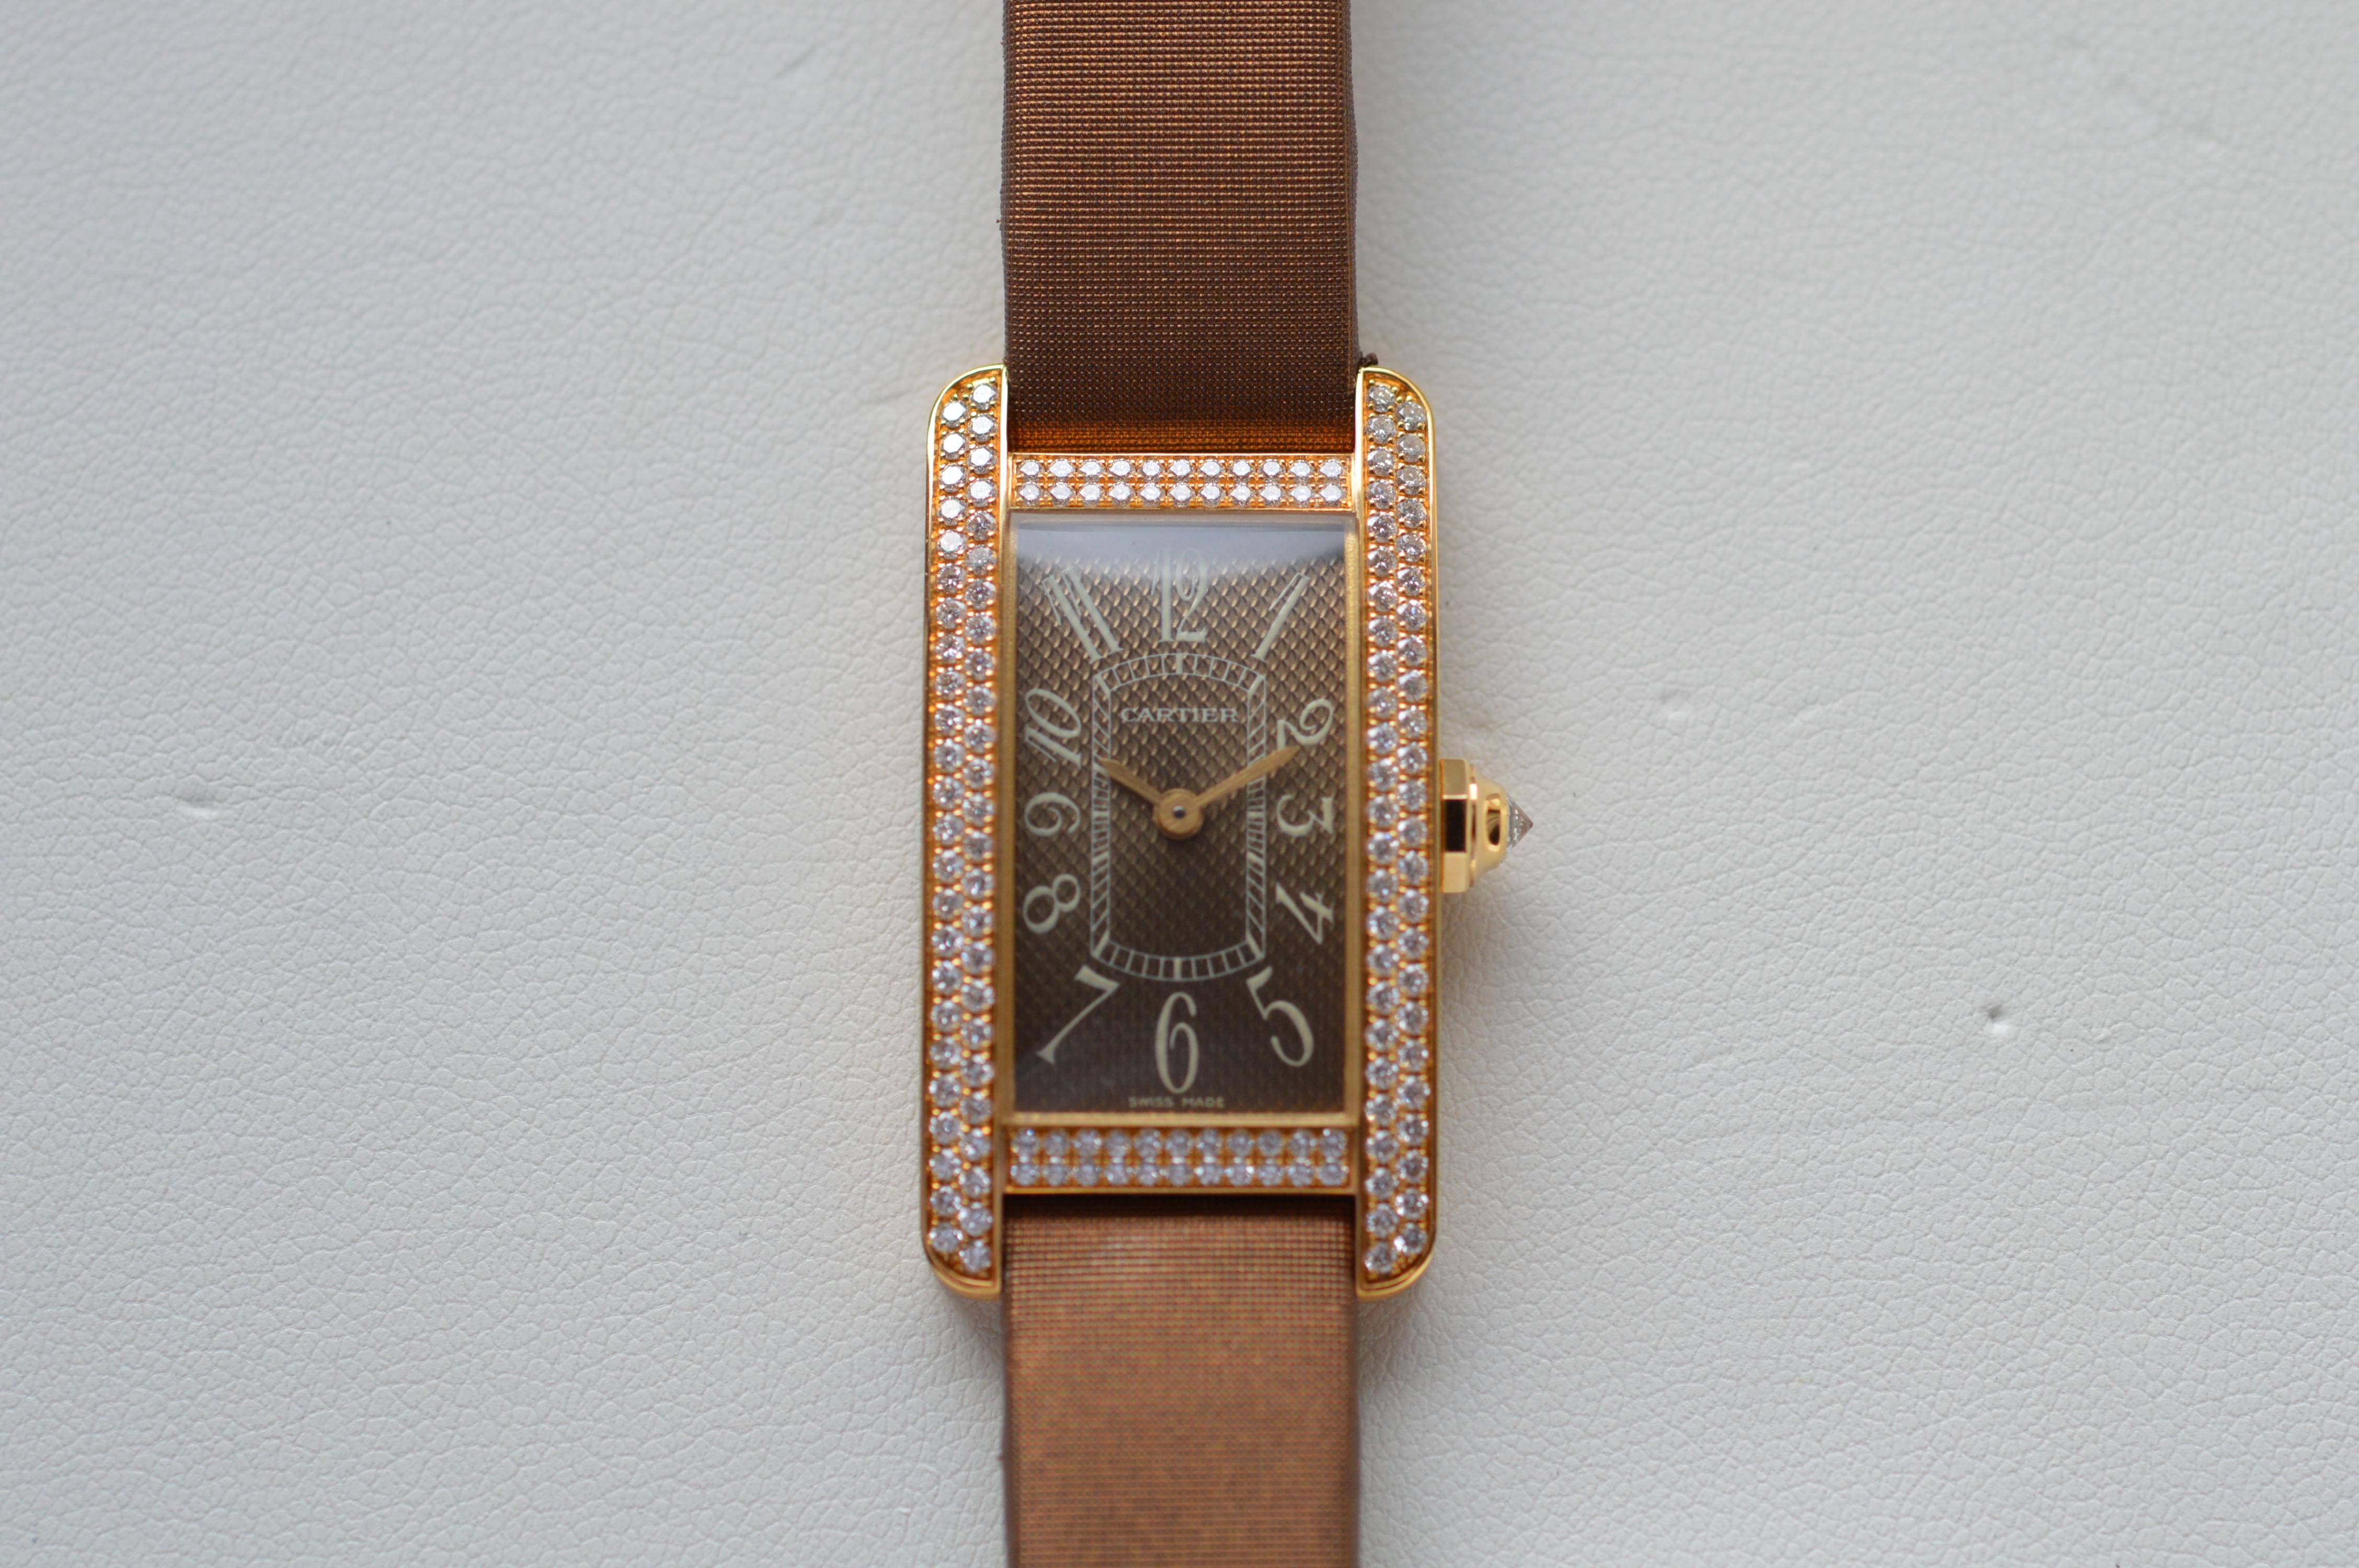 Cartier Tank Americaine PM 18K Yellow Gold on Satin Strap with Diamond Bezel
Reference n° WB704331
PM (Petit Model) size
35 X 19mm
18K Yellow Gold Case
Brown Satin Strap
White Diamond Crown
Brown Dial
Water-Resistant
Qartz Movement
143 Top Wesselton